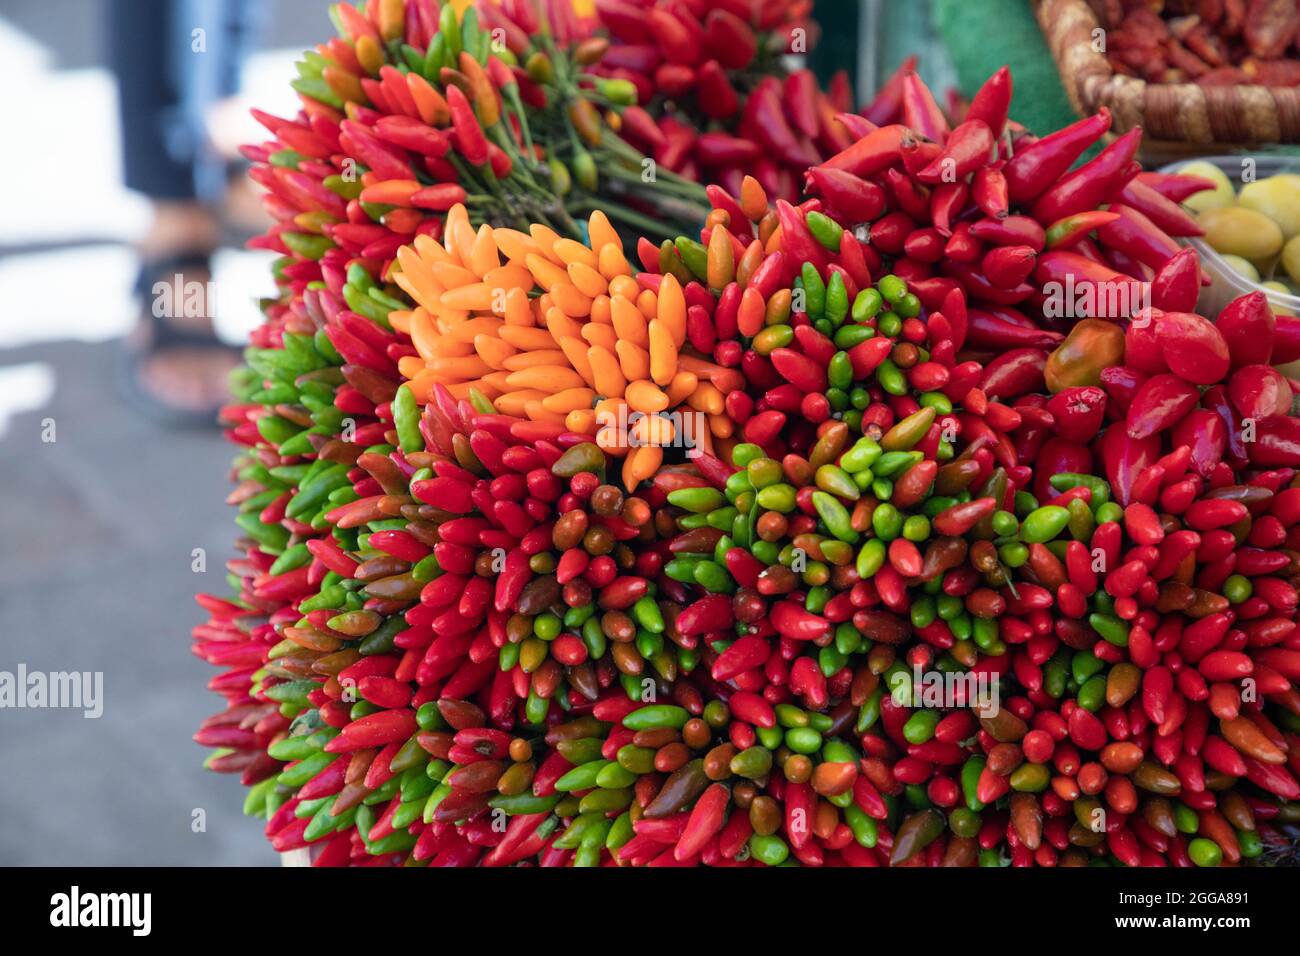 Hot peppers of various colors - healthy bio ingredients Stock Photo